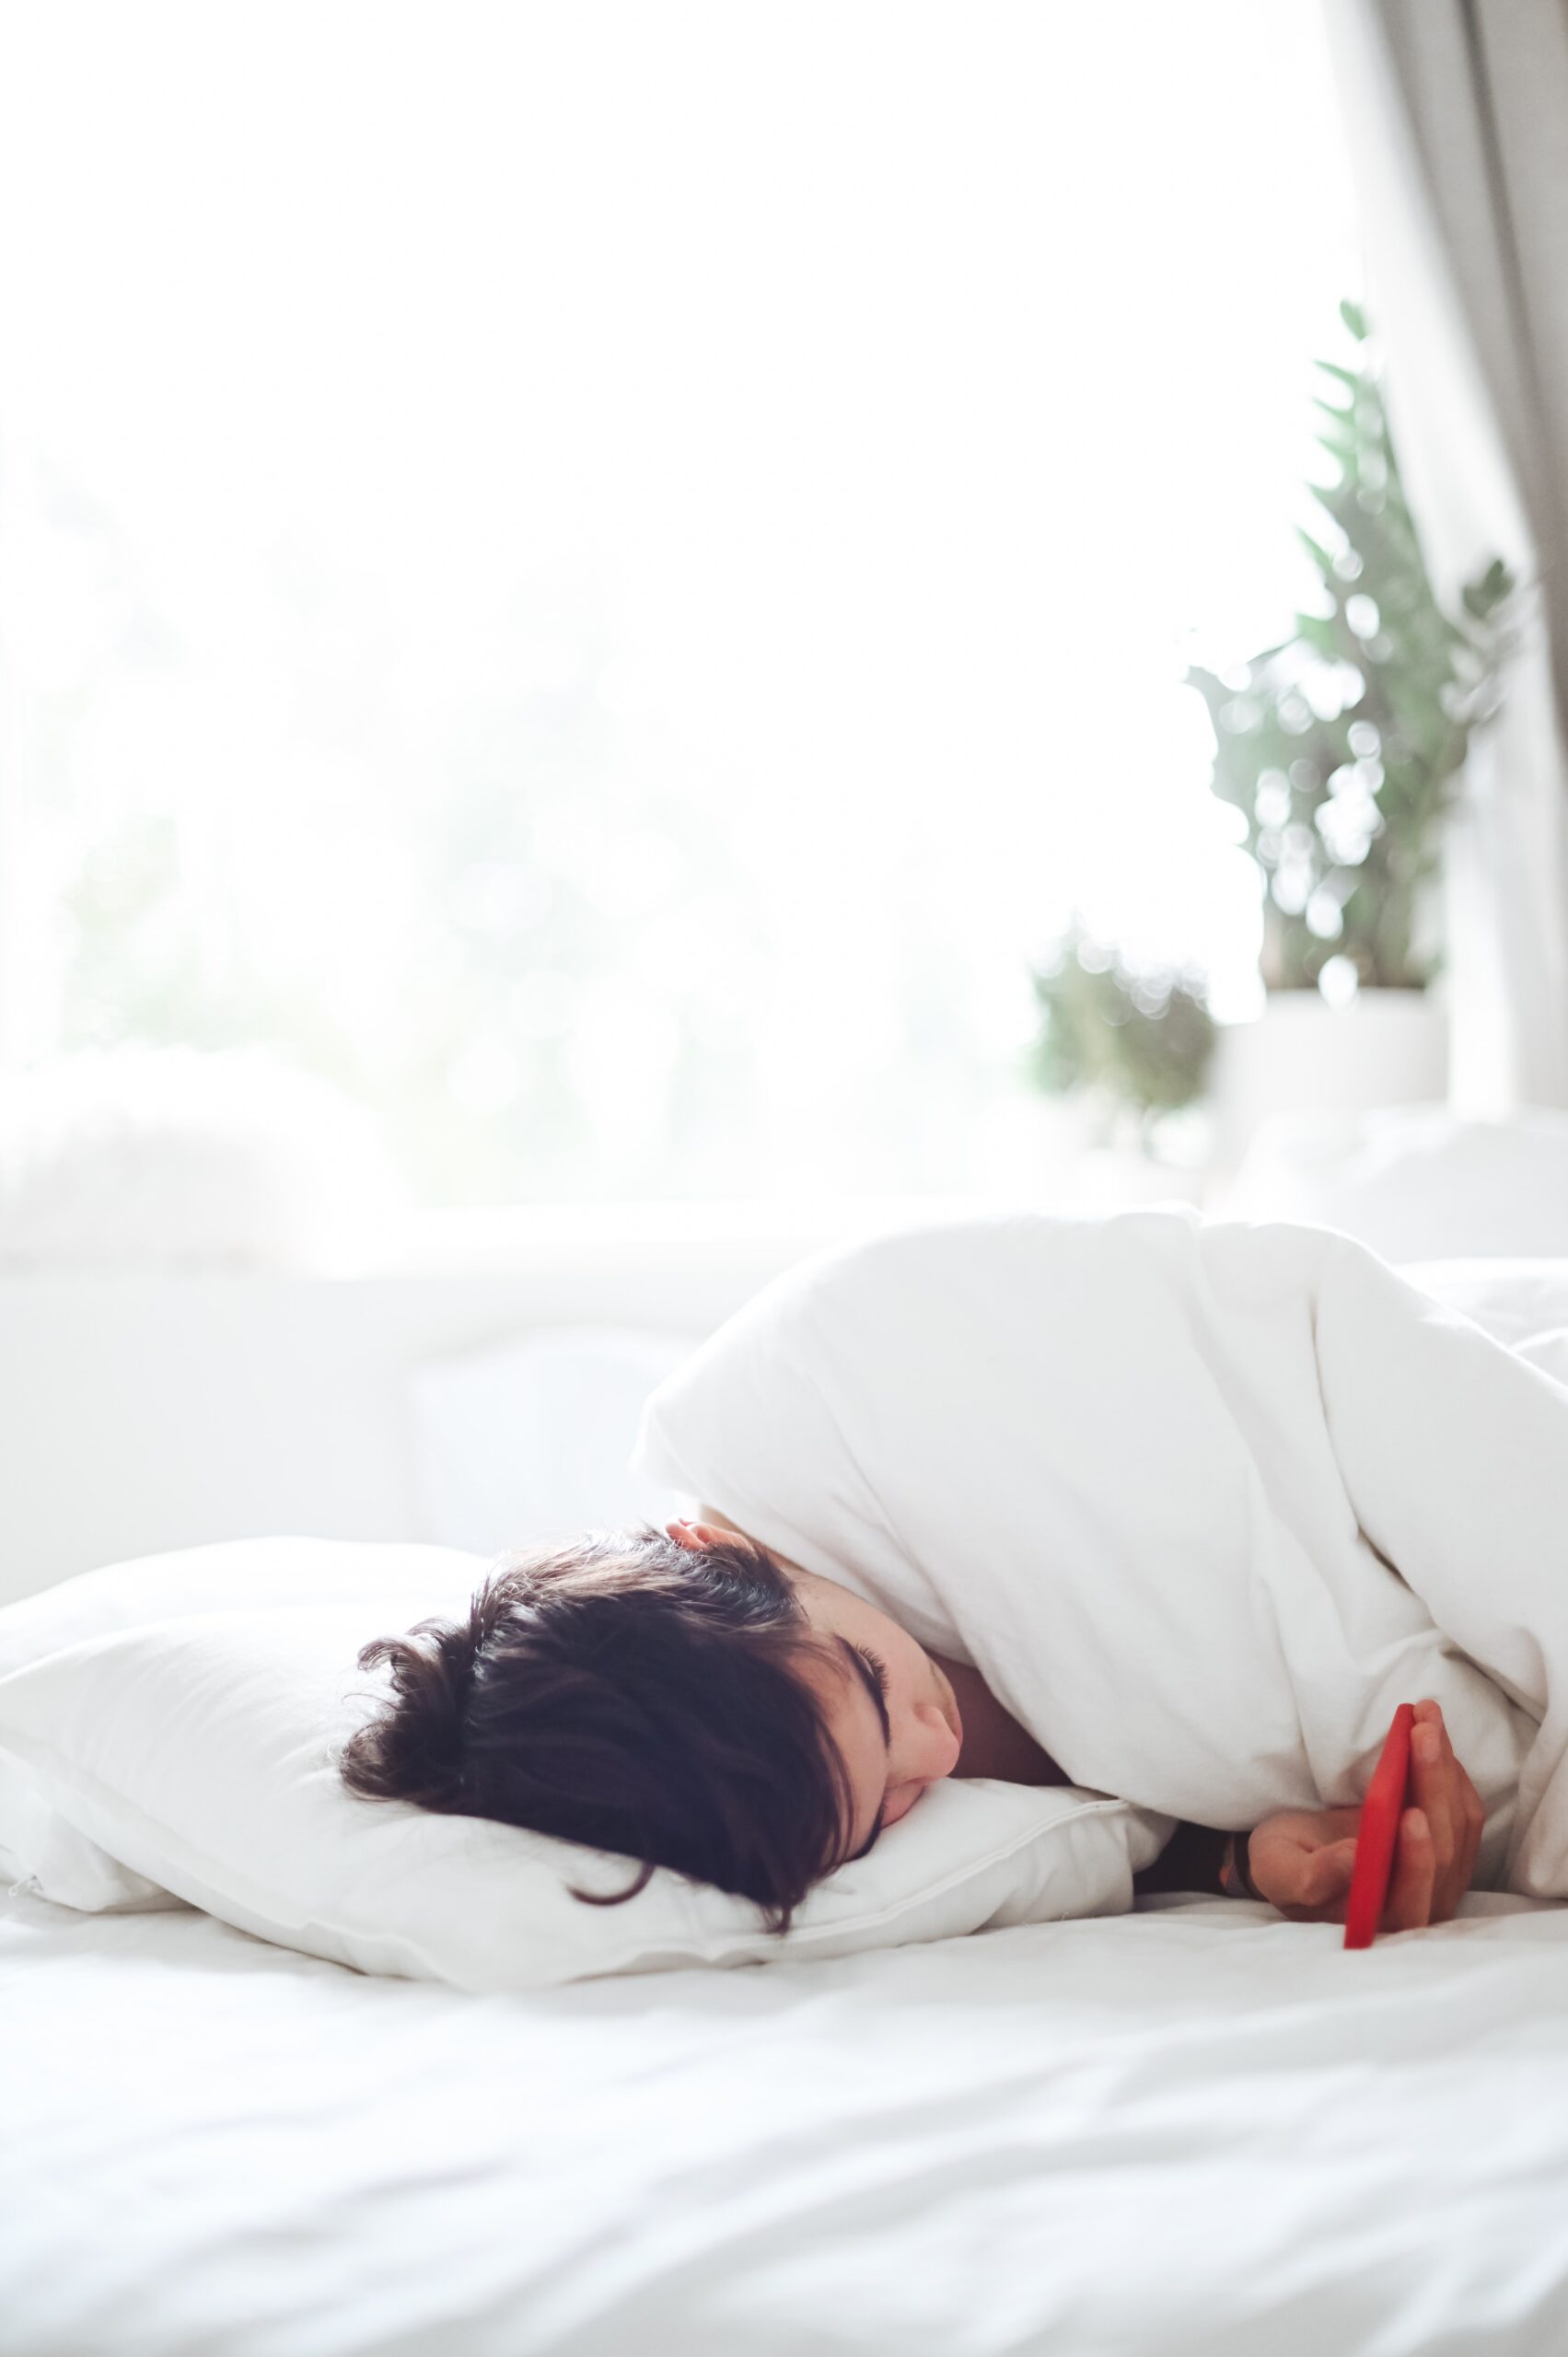 What Are the Best Sleeping Positions to Prevent Back and Neck Pain?